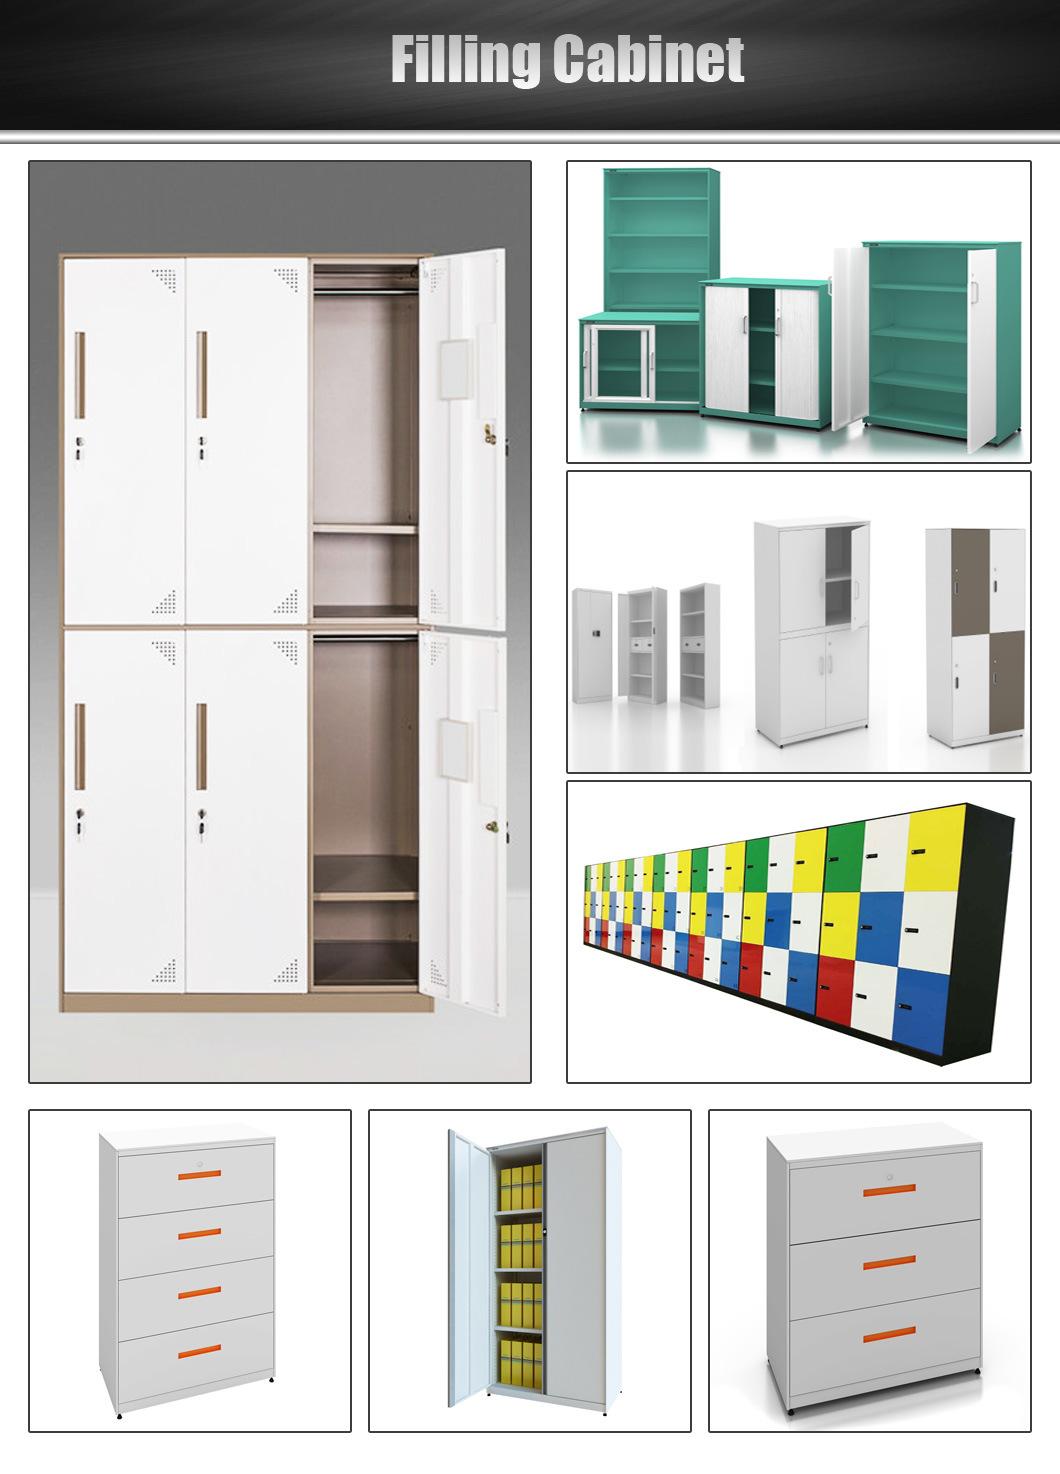 High Admiration Work Storage Cabinets with Environmentally-Friendly Materials